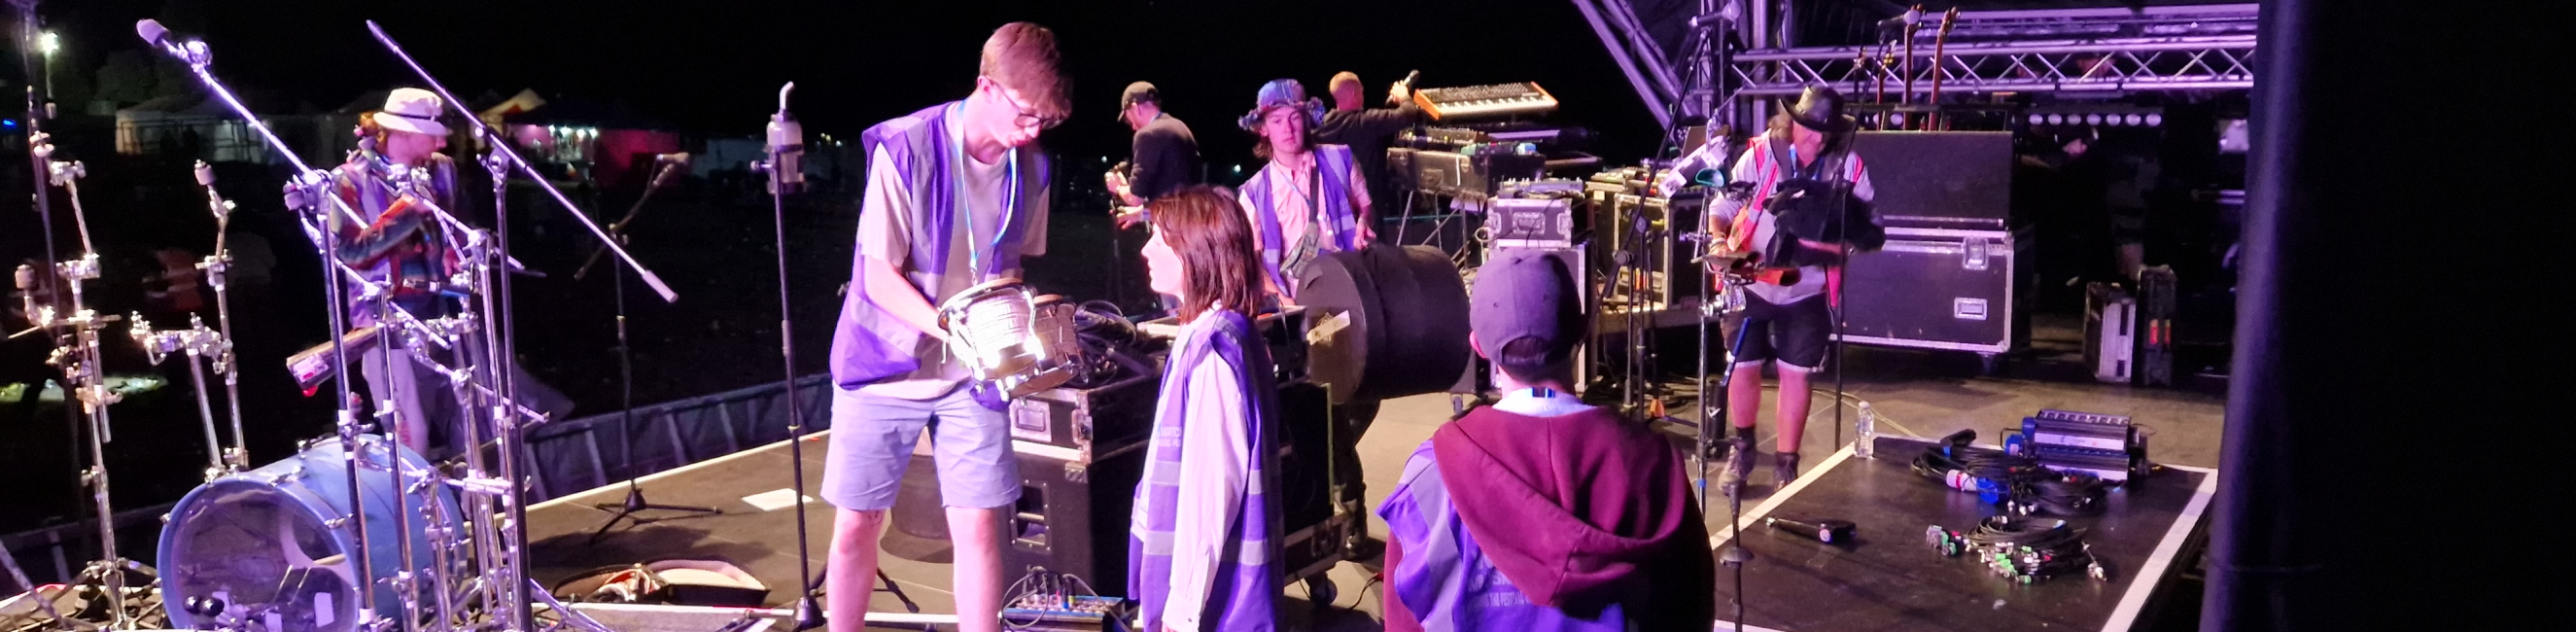 Music and Media learners volunteering at Watchet Festival